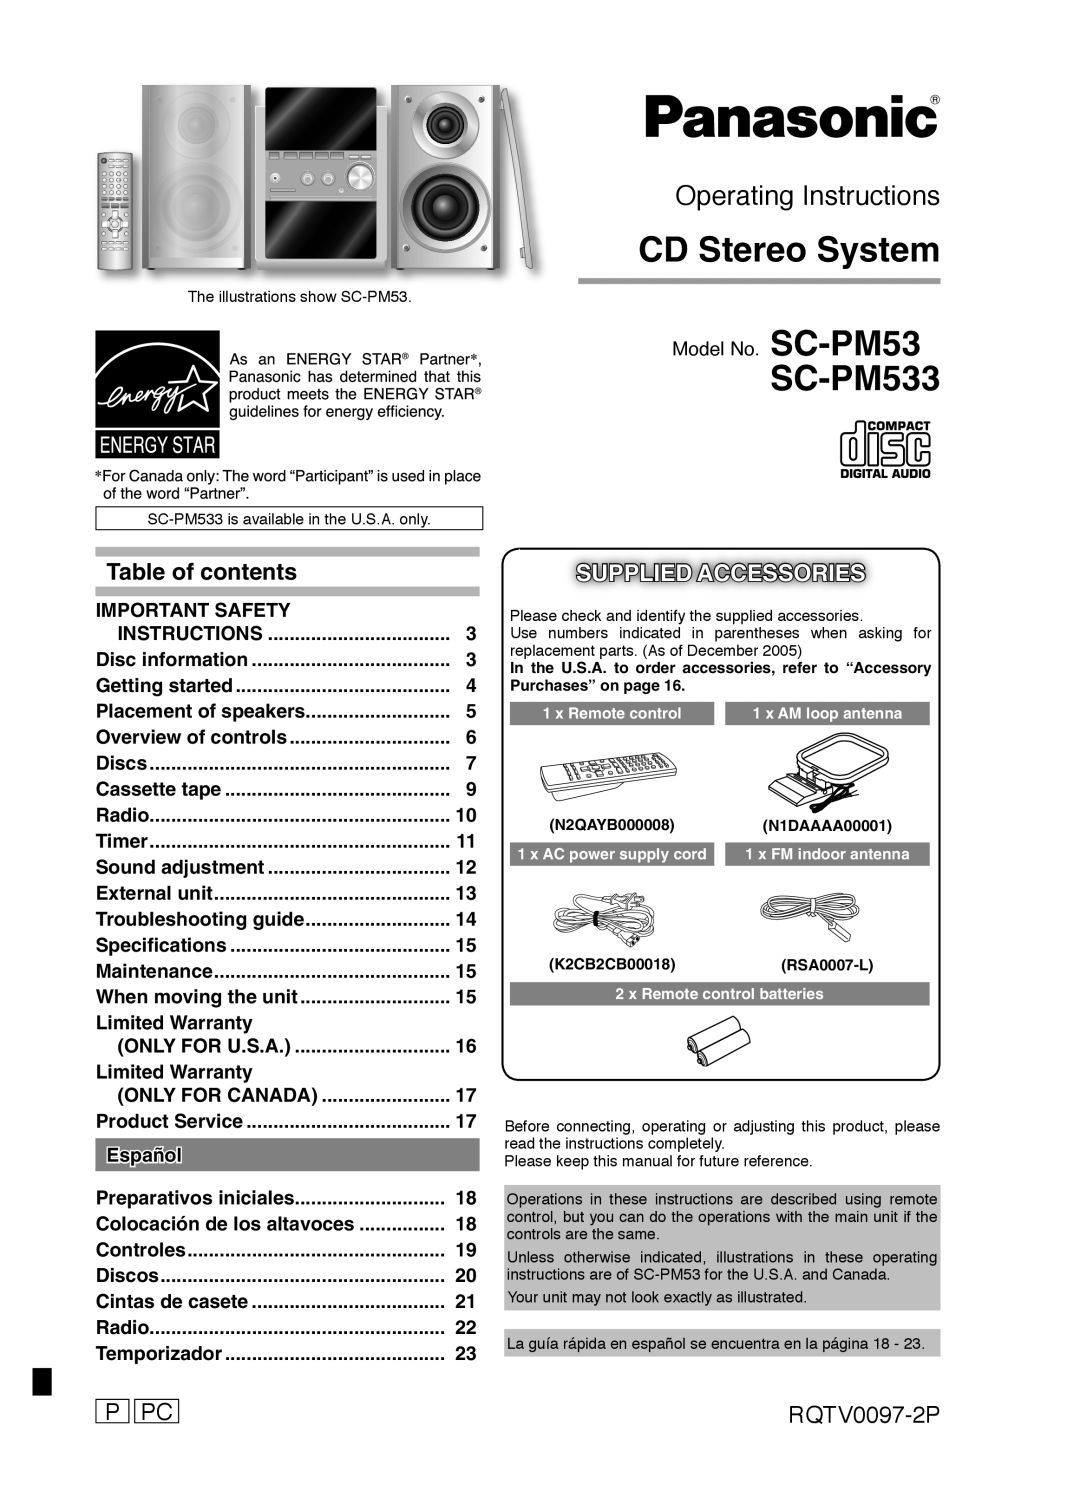 Panasonic SCPM533 important safety instructions Table of contents, Supplied Accessories, P Pc, RQTV0097-2P, Español 